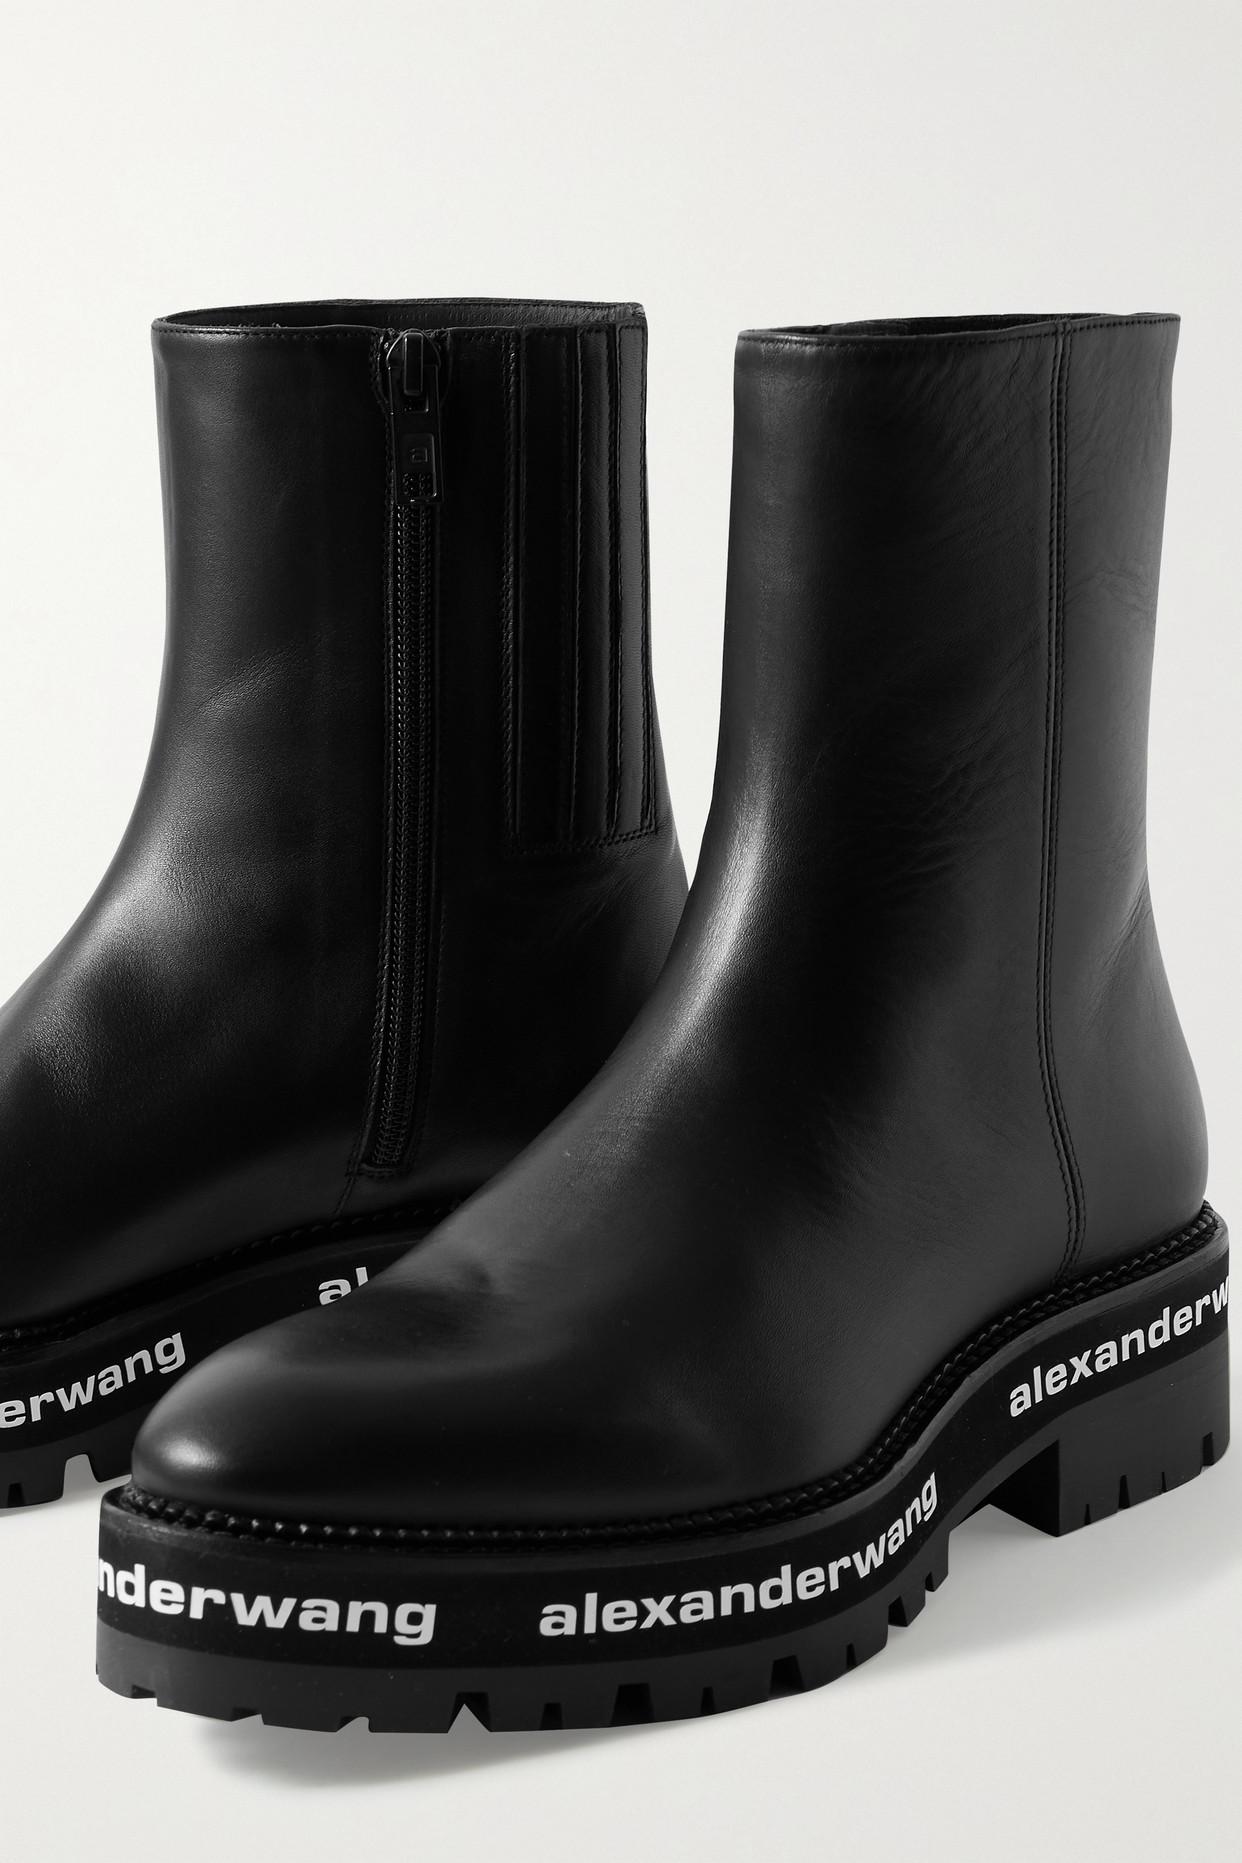 Preference rygte Dæmon Alexander Wang Sanford Logo-print Leather Ankle Boots in Black | Lyst